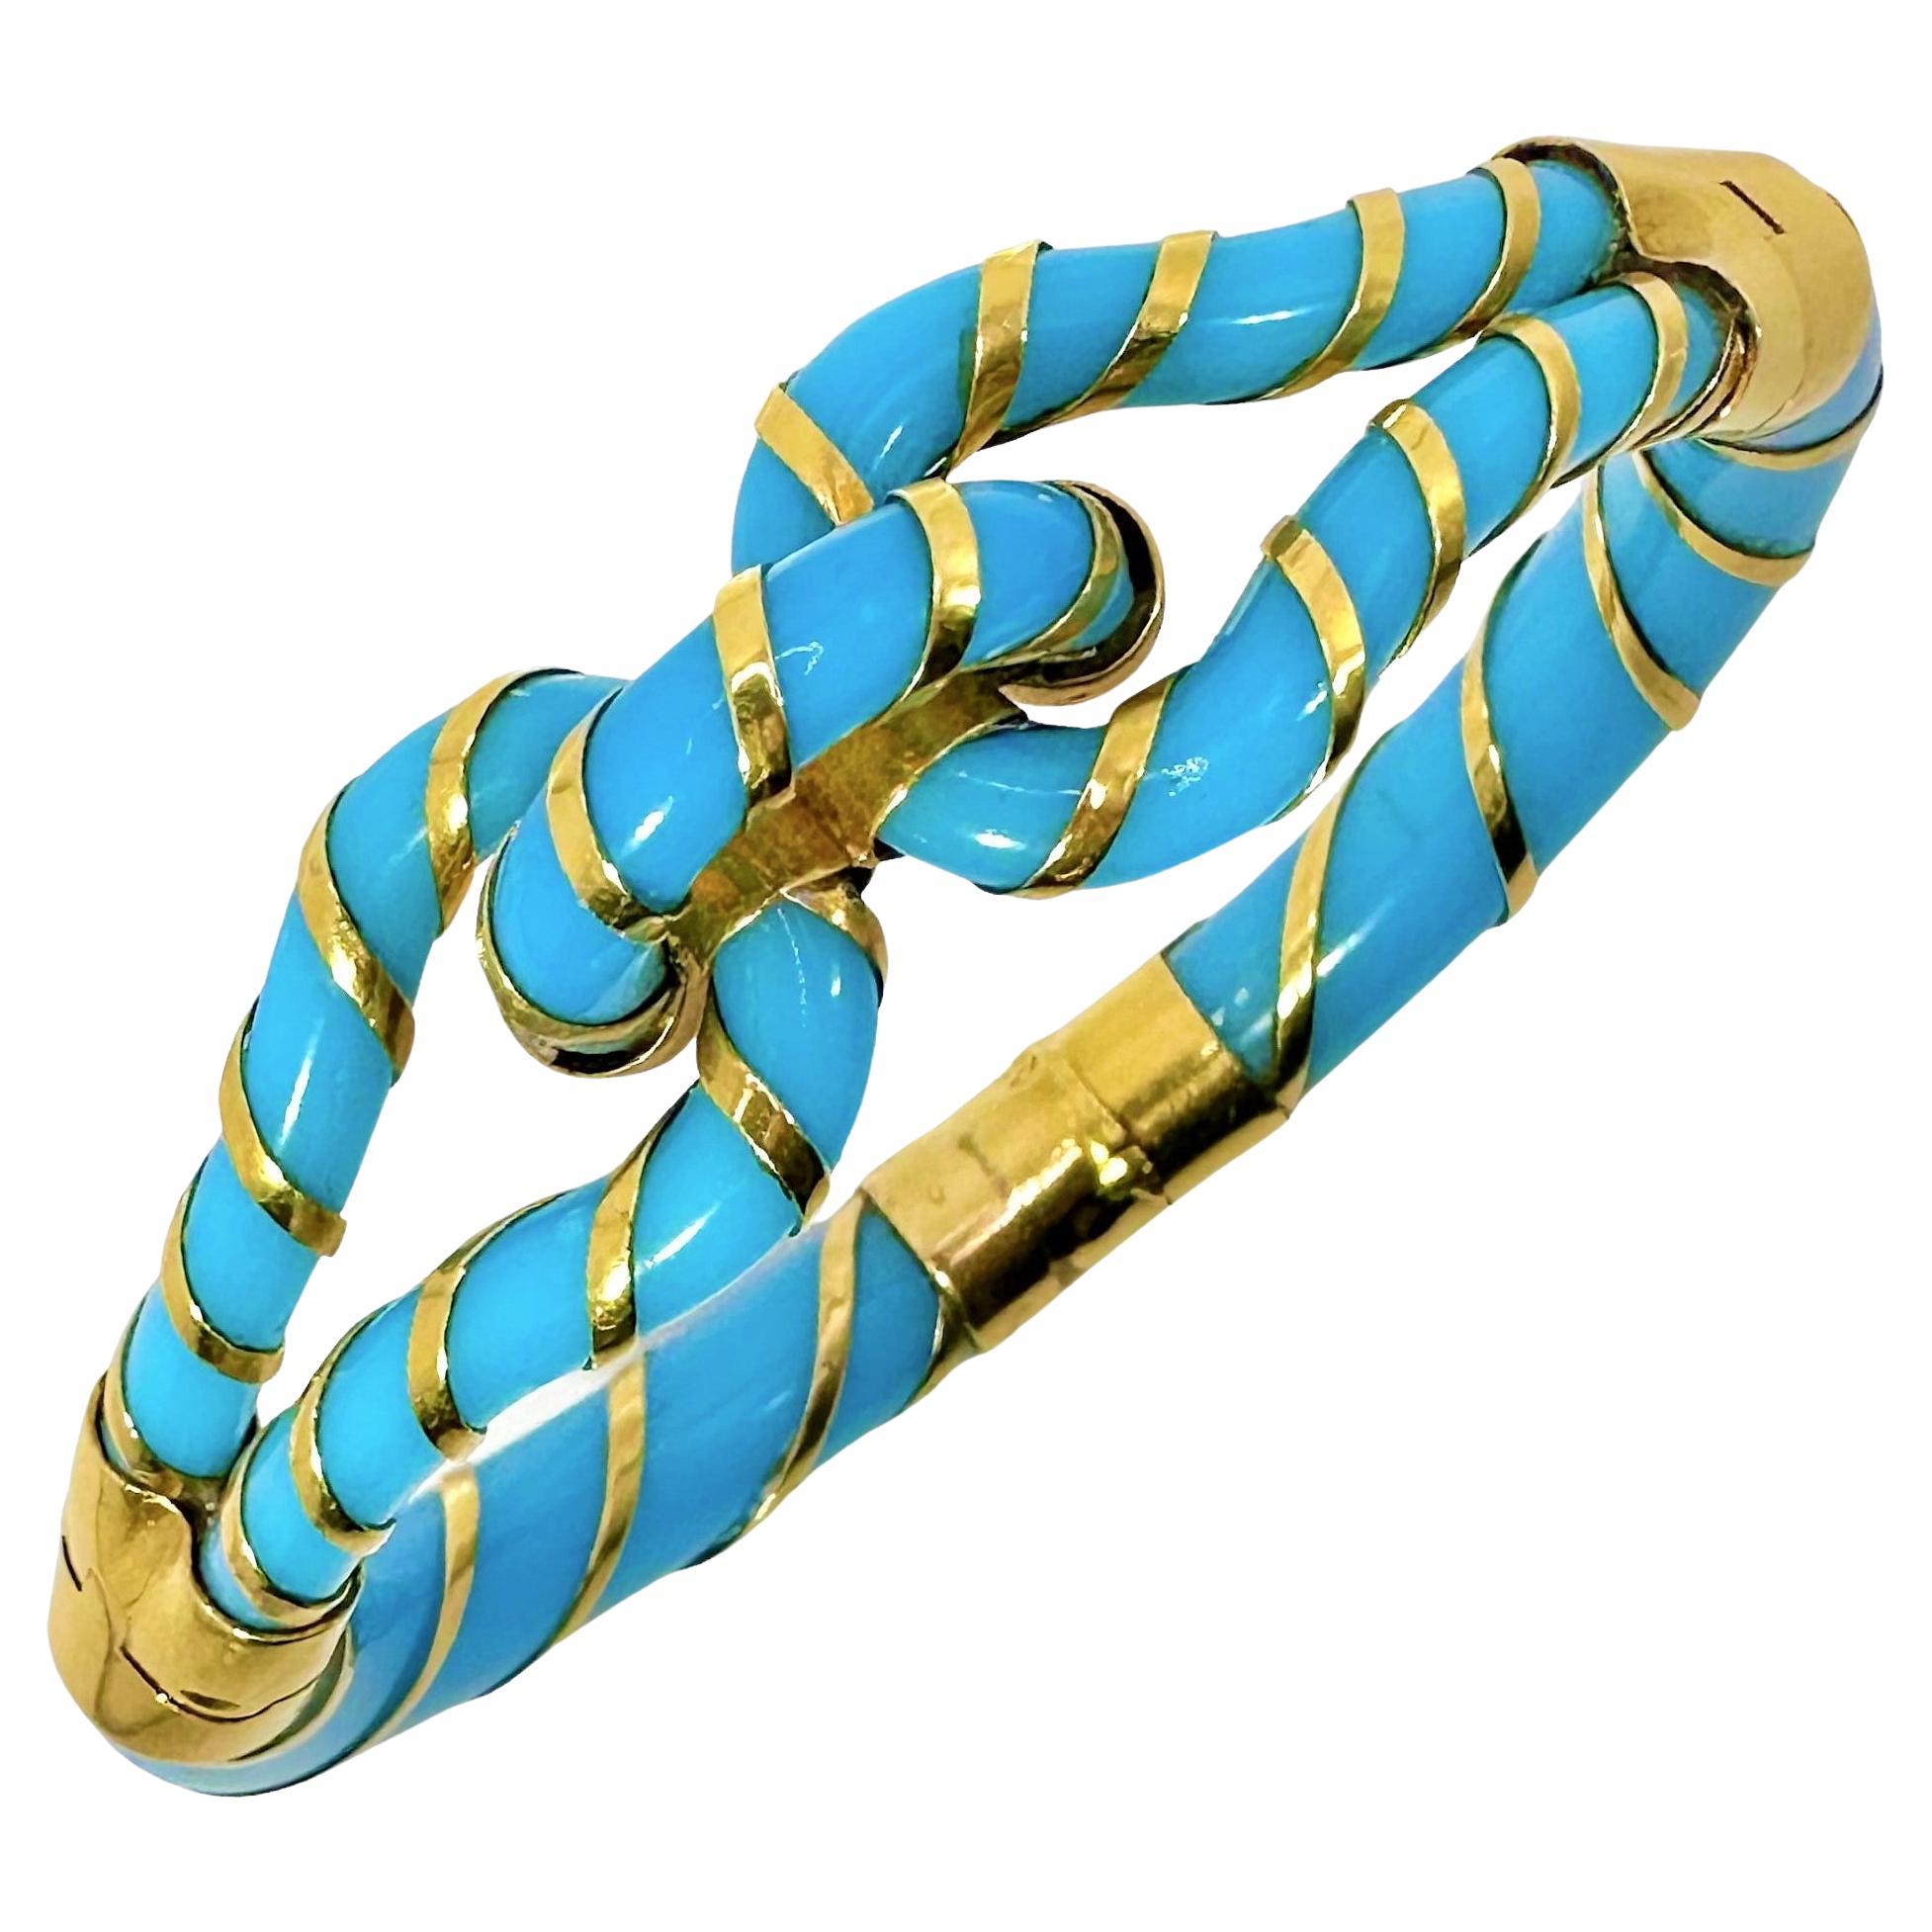 Antique Yellow Gold and Turquoise Color Glass Knot Bracelet